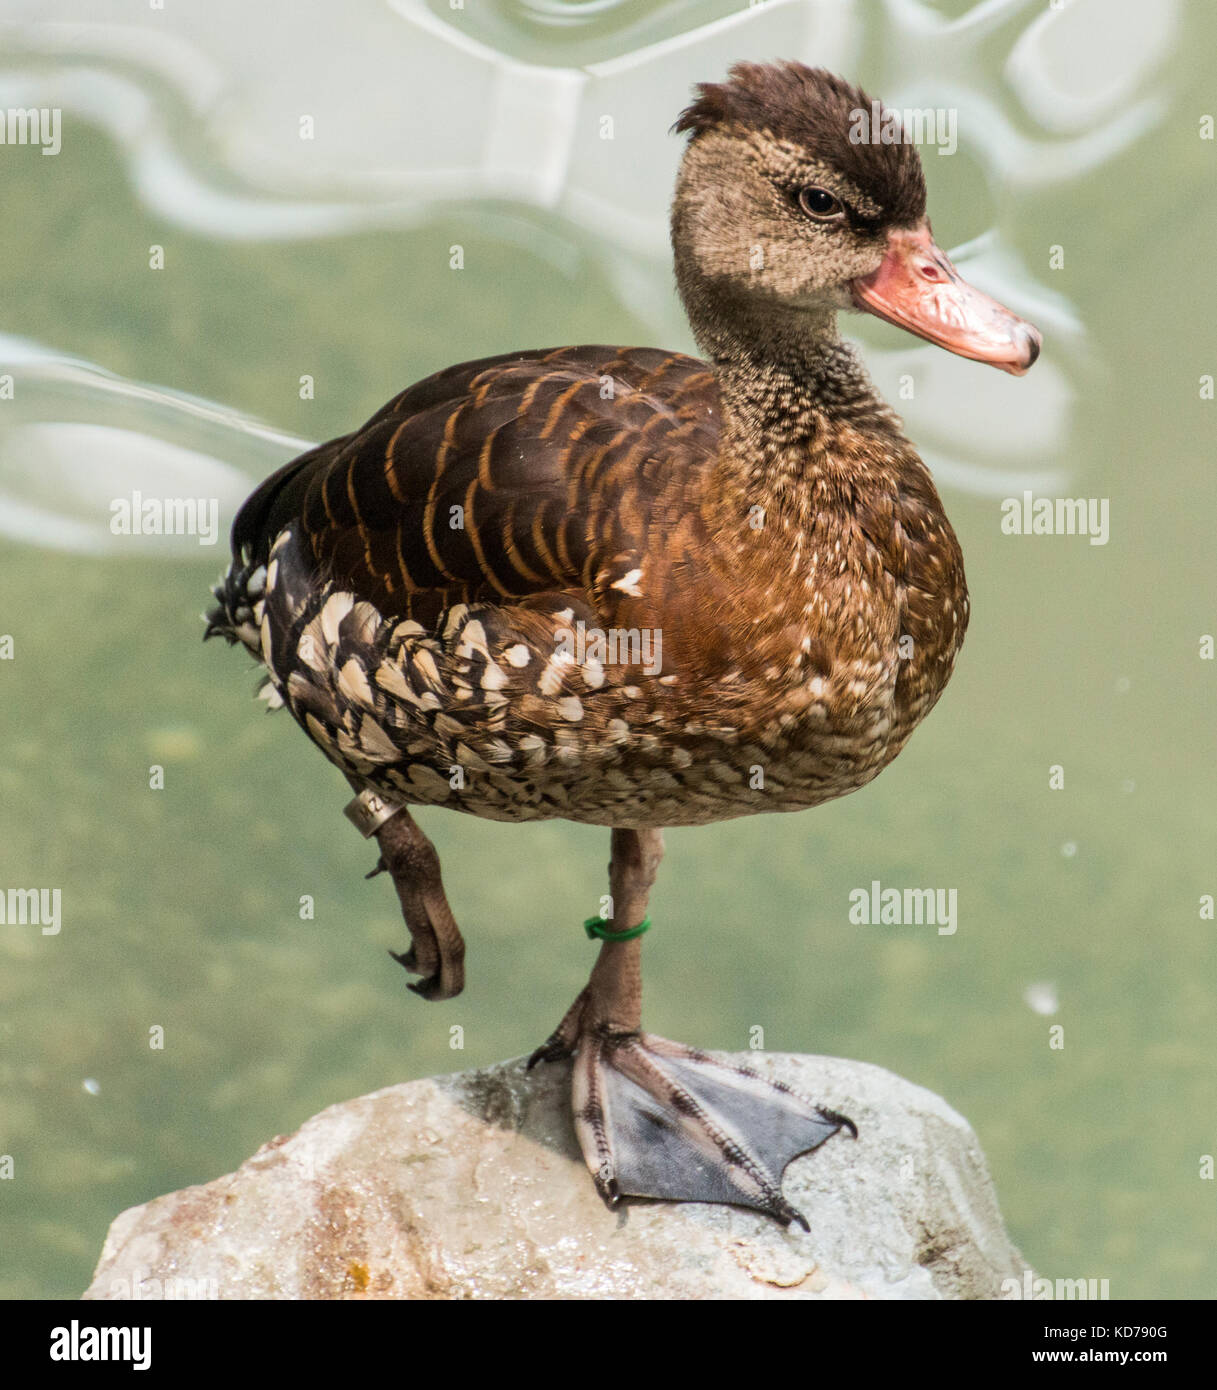 An aquatic bird stands on a rock with one leg up. Stock Photo